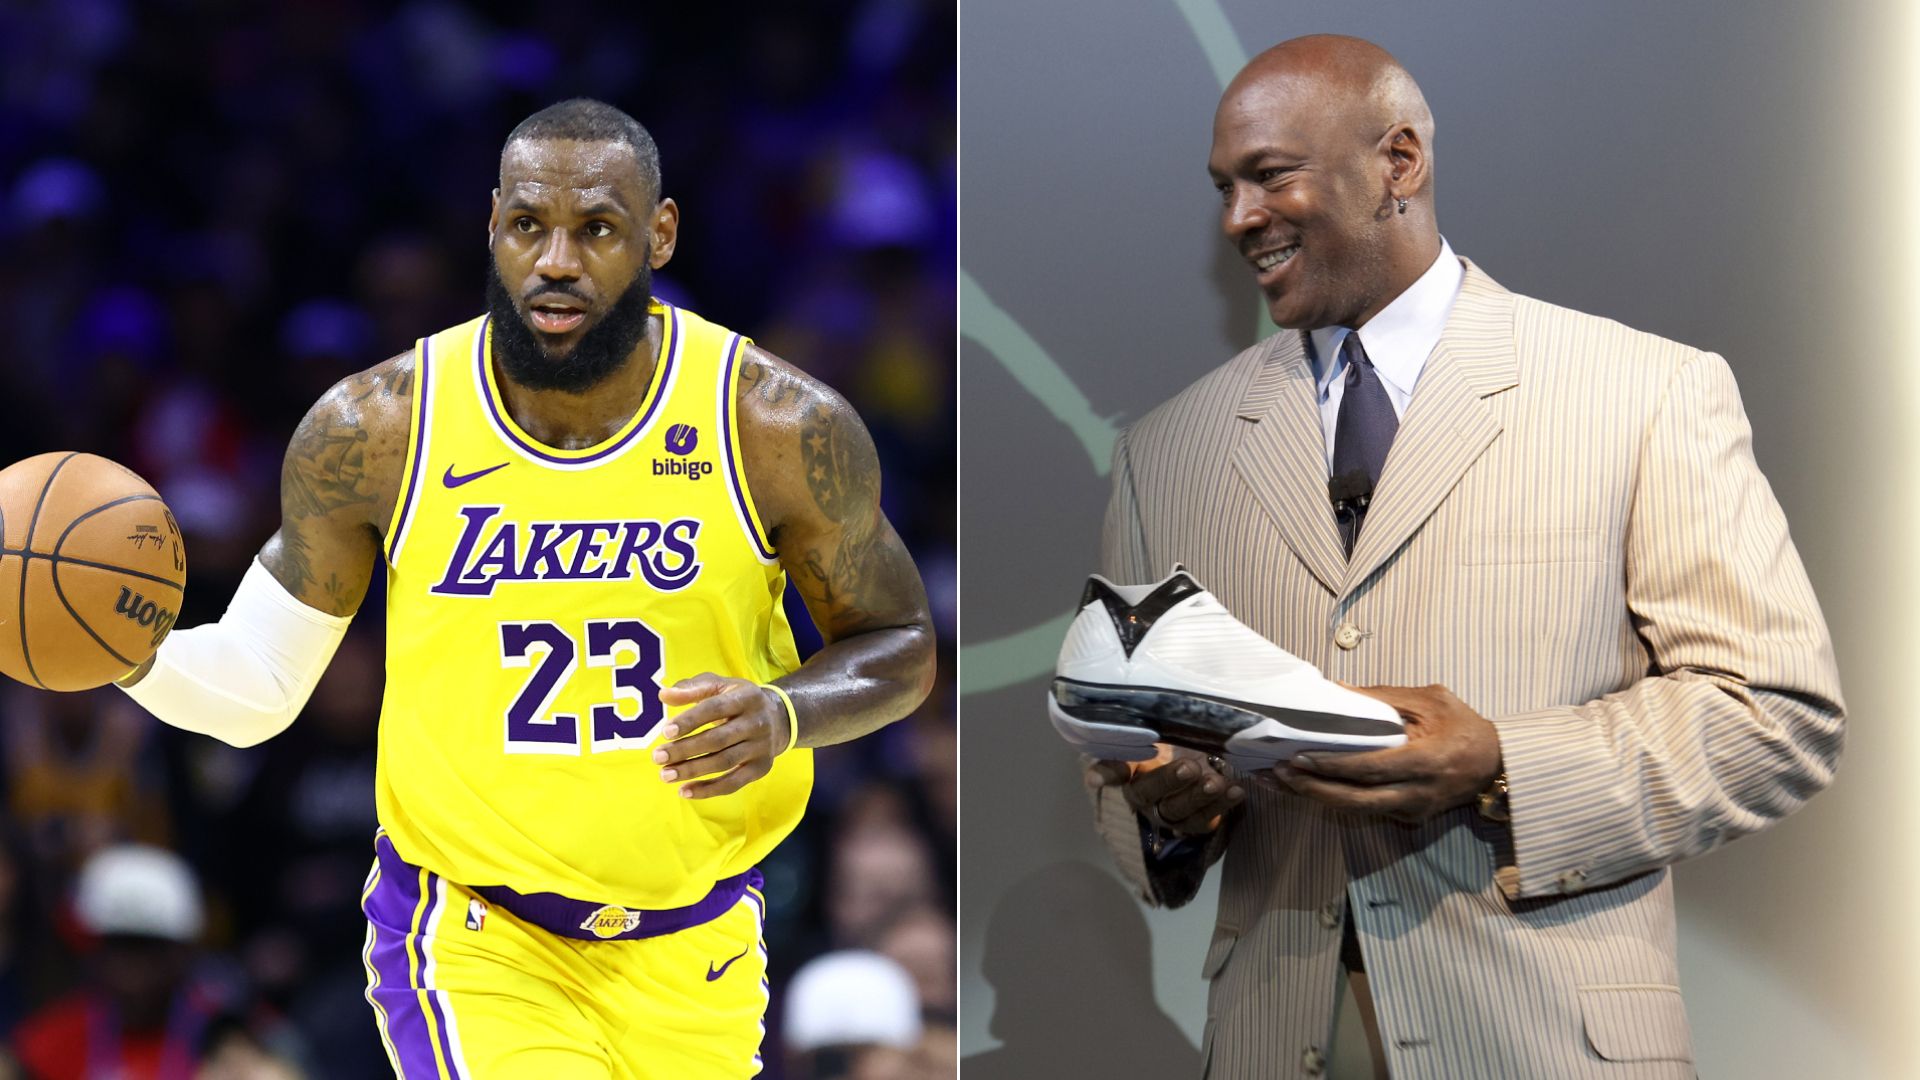 The richest NBA players of all time – Michael Jordan, LeBron James, Magic Johnson, and more billion-dollar net worths compared